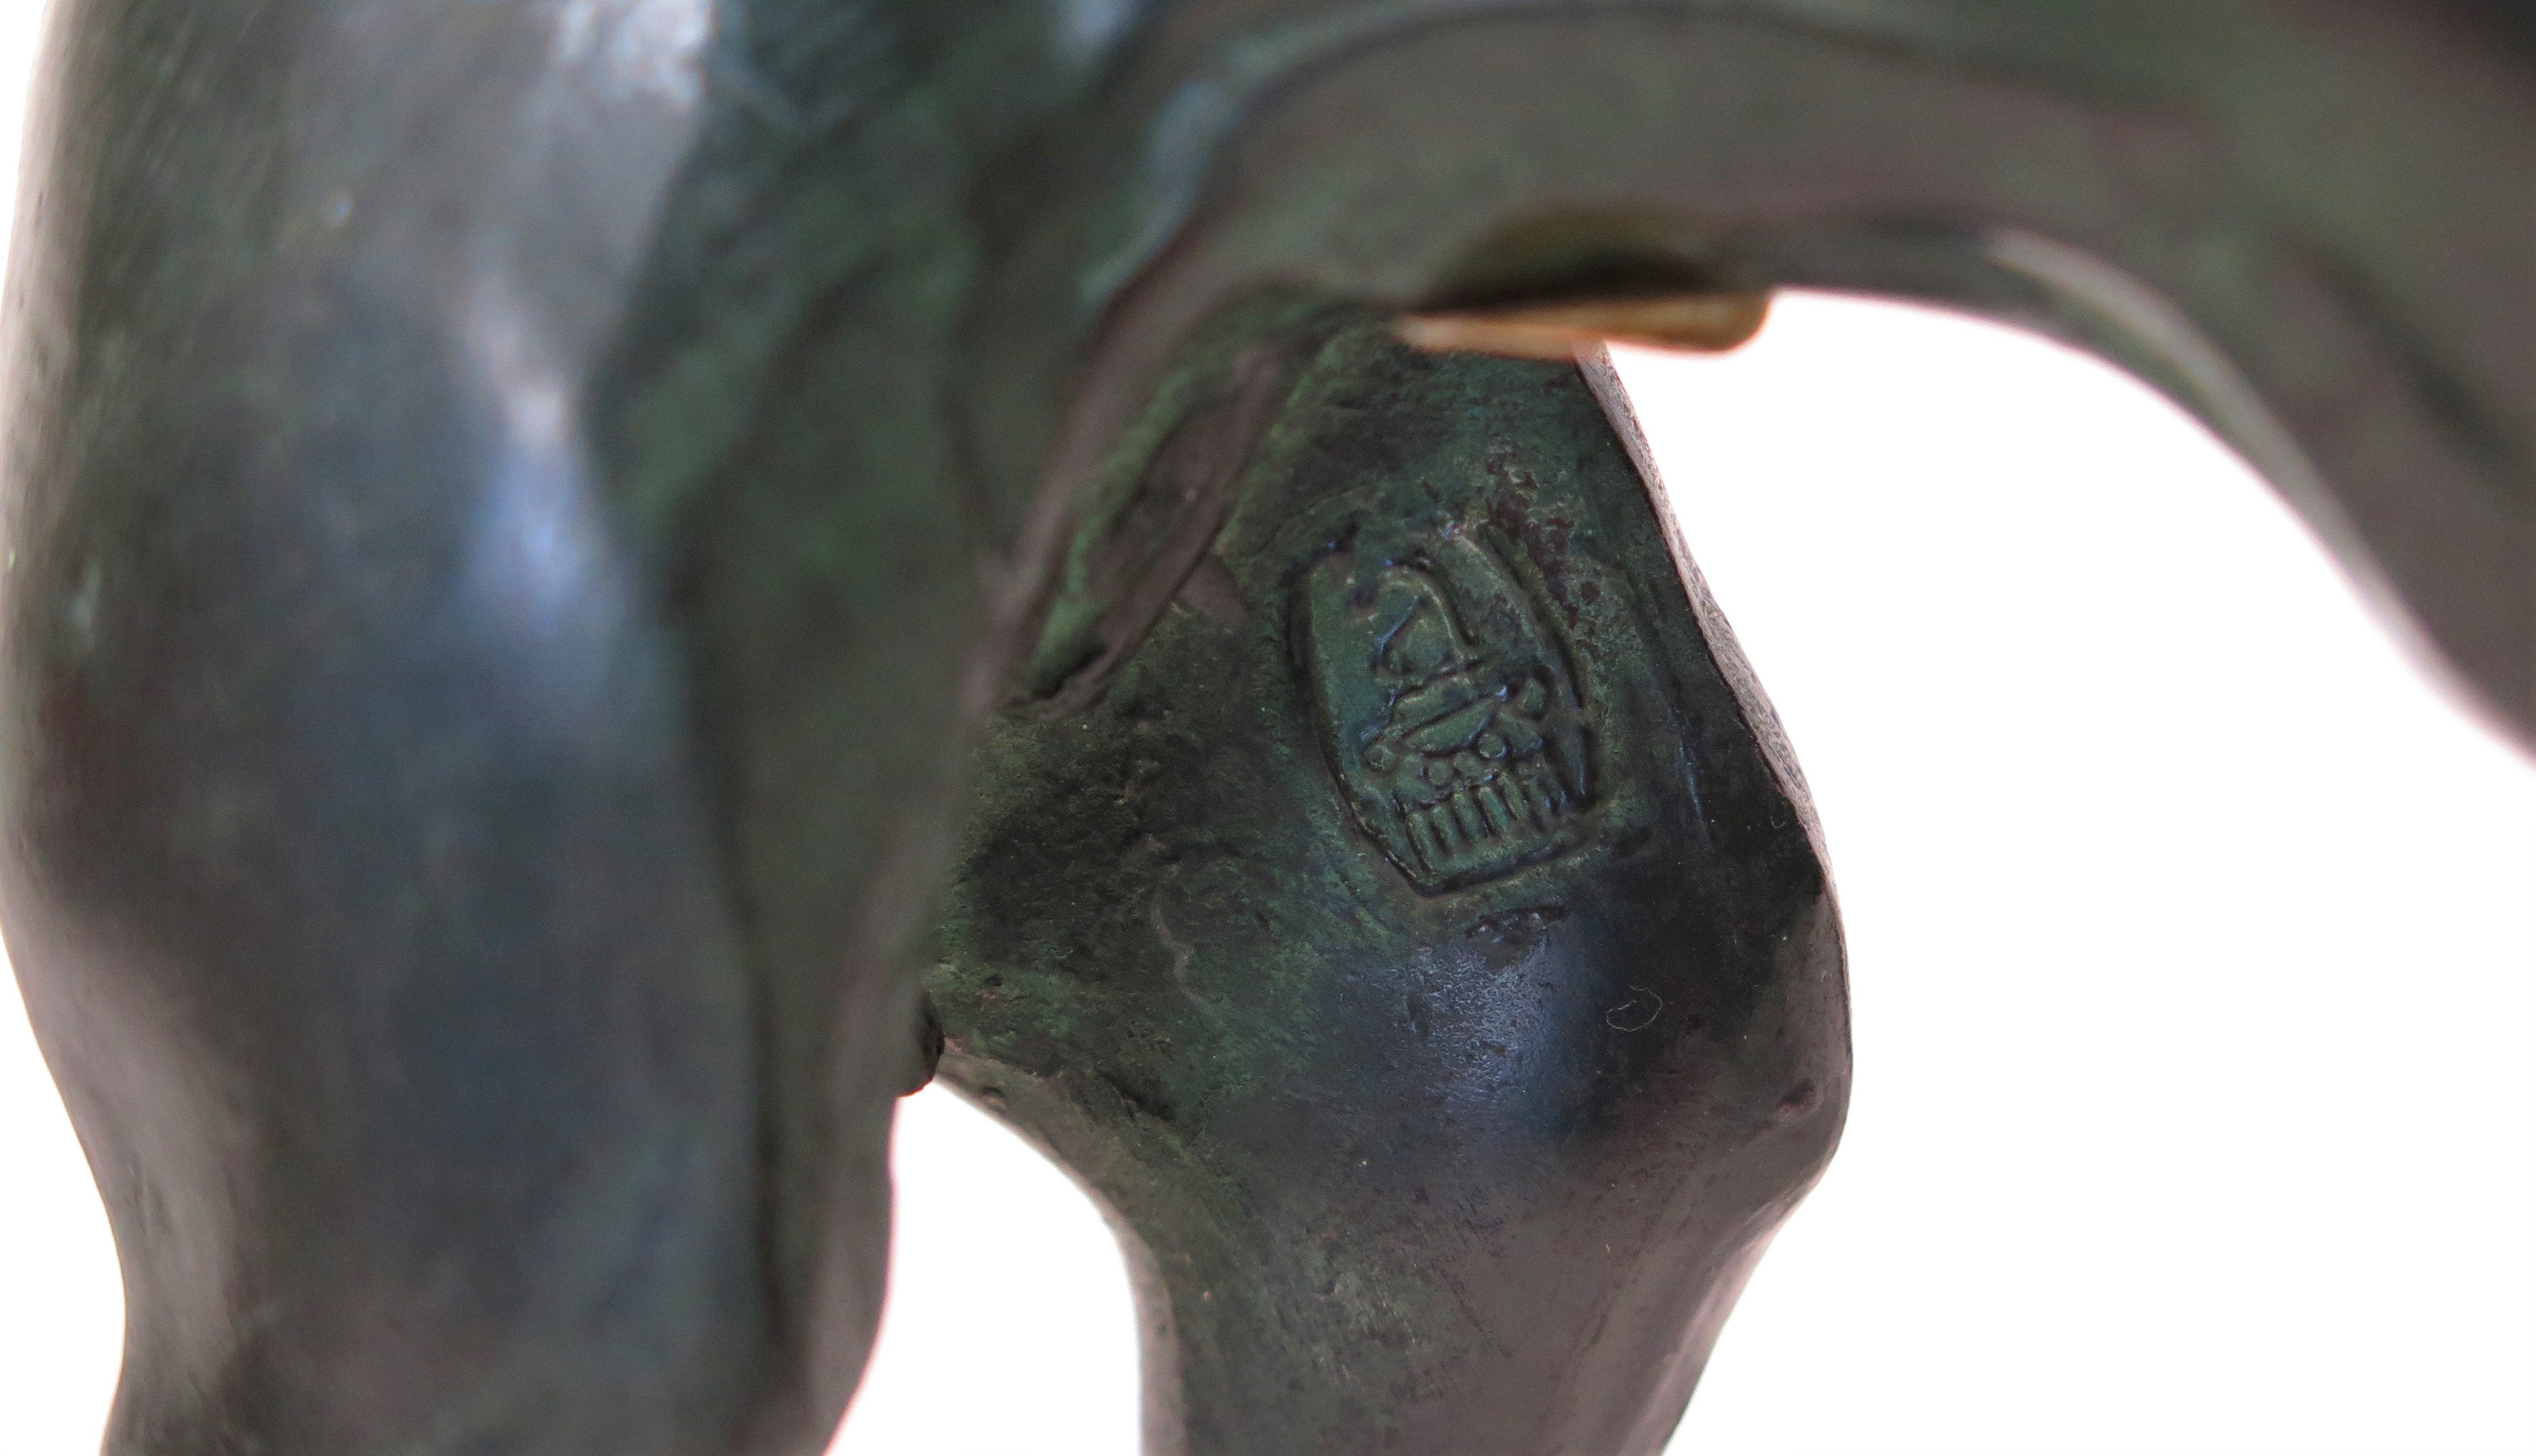 Italian Bronze Sculpture of a Whippet, Stamped